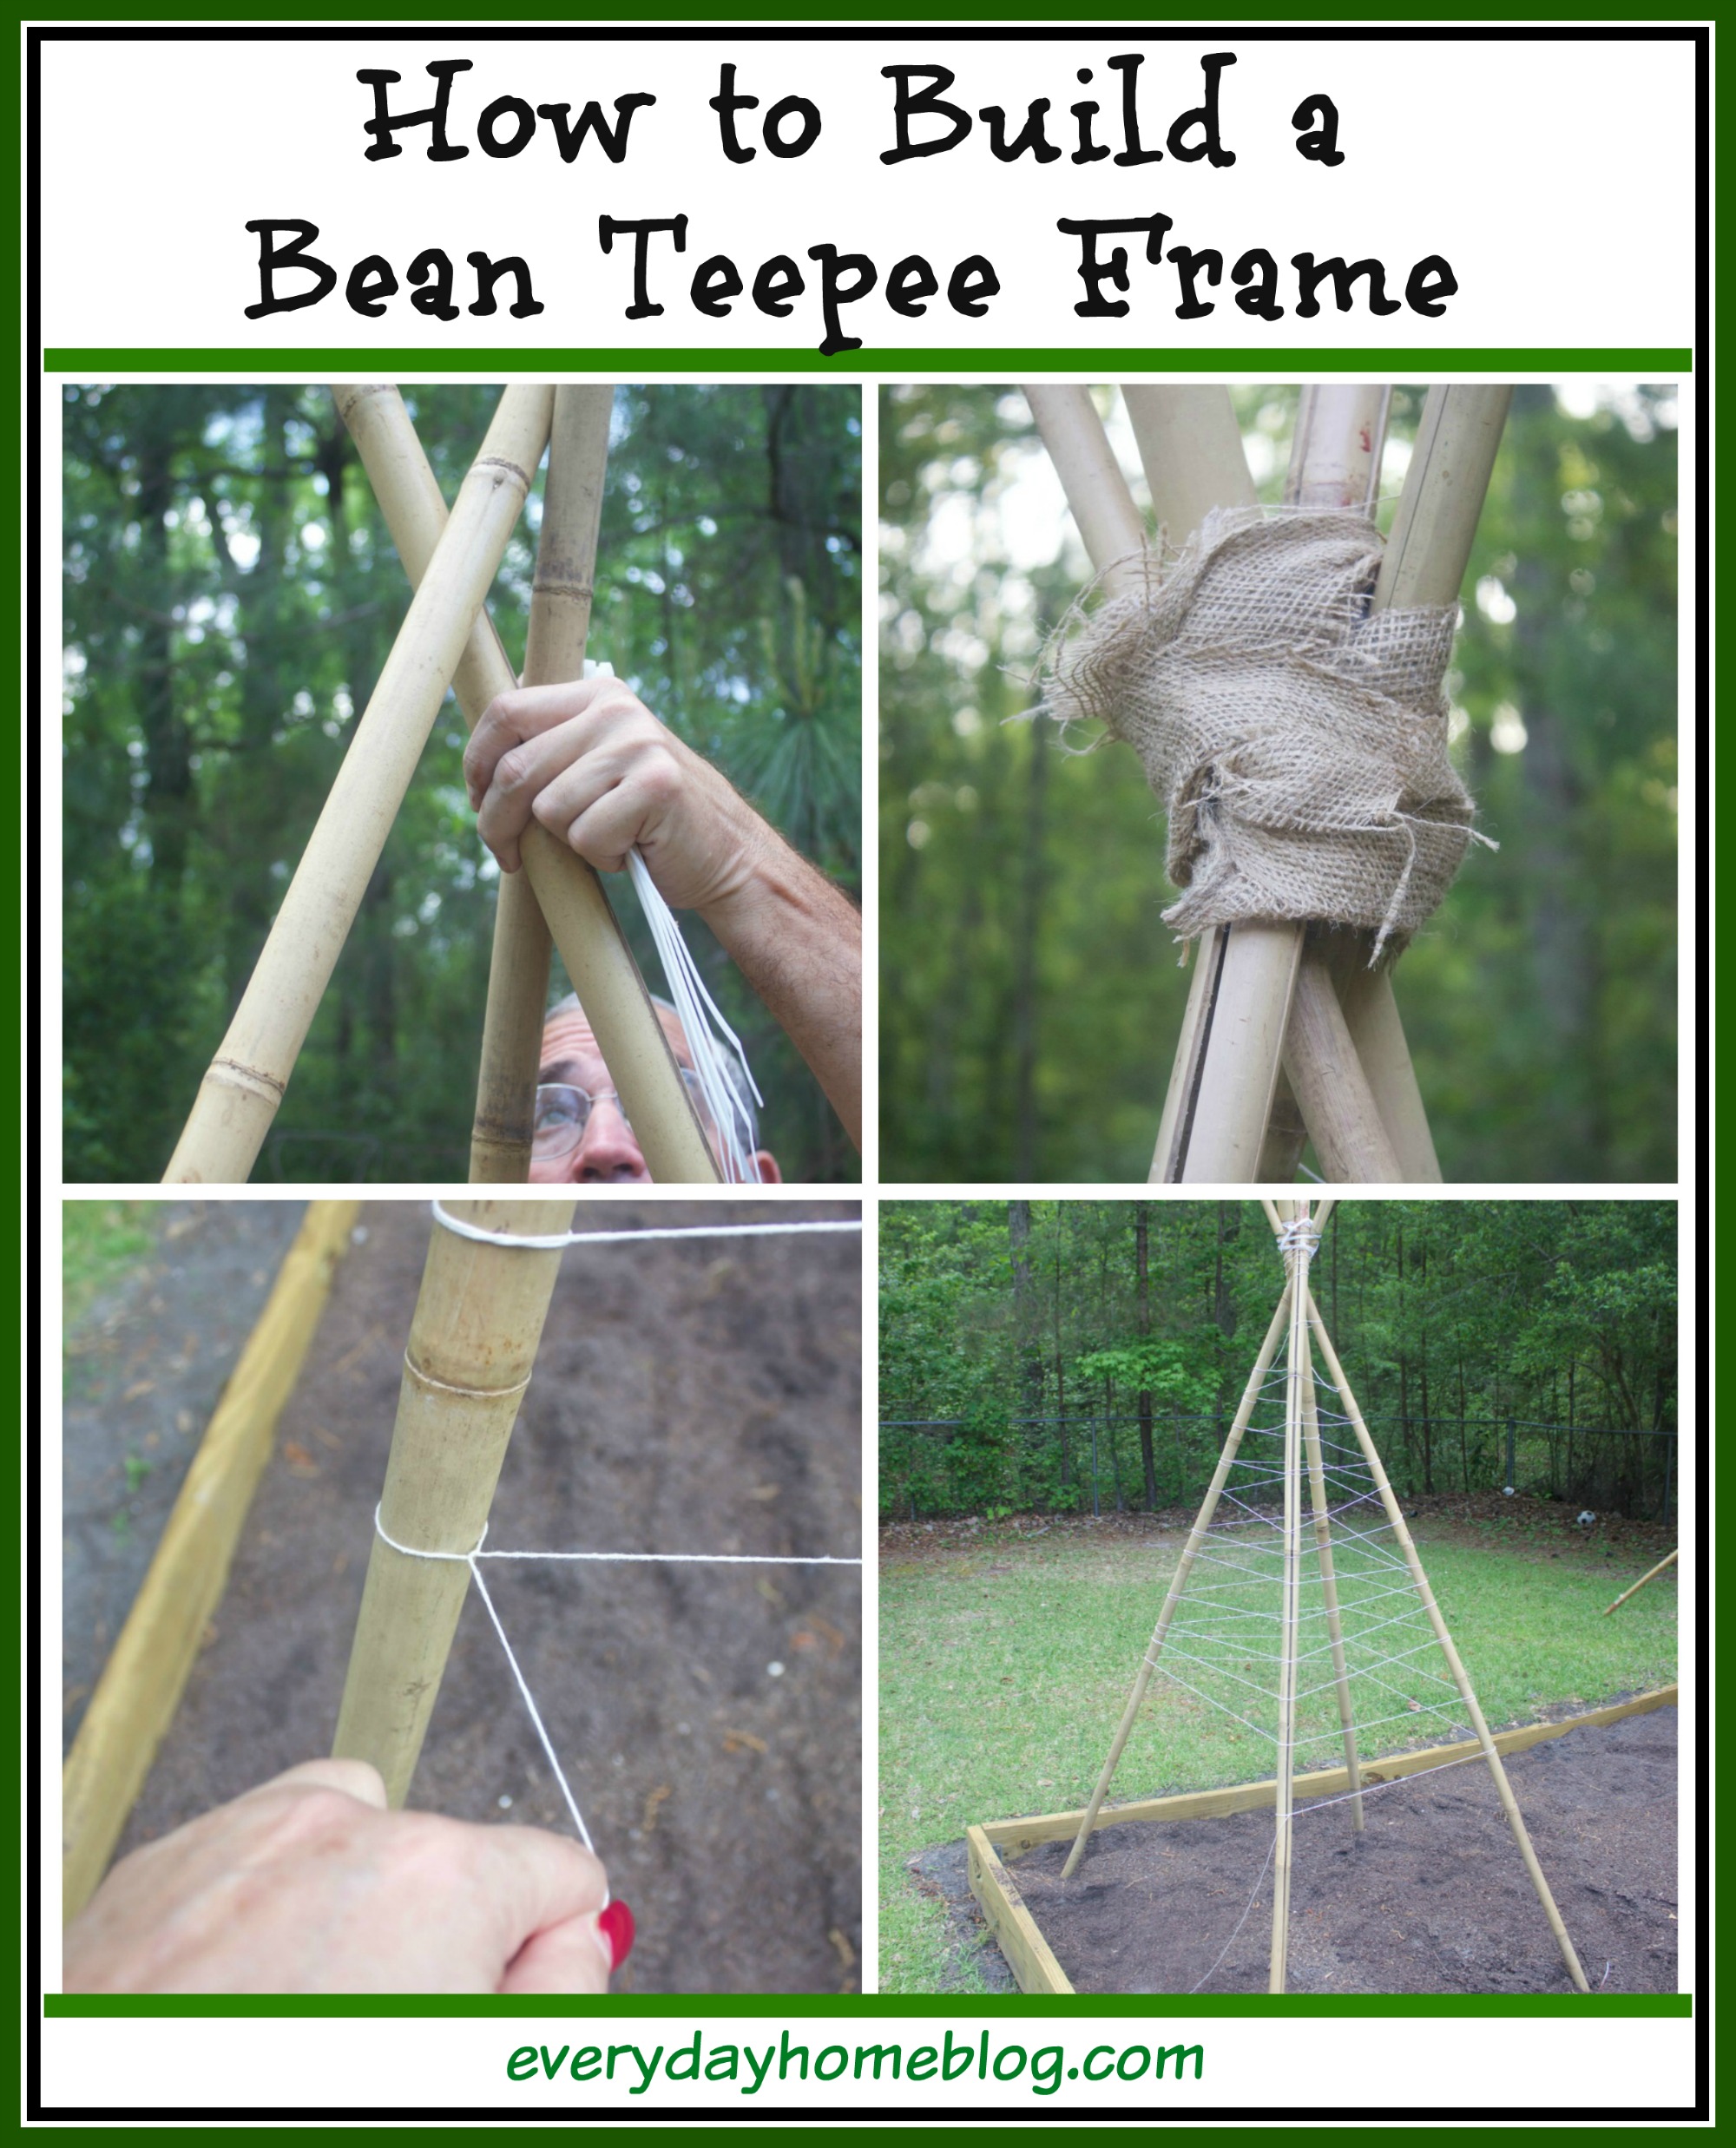 How to Build a Bean Teepee Frame | The Everyday Home Blog